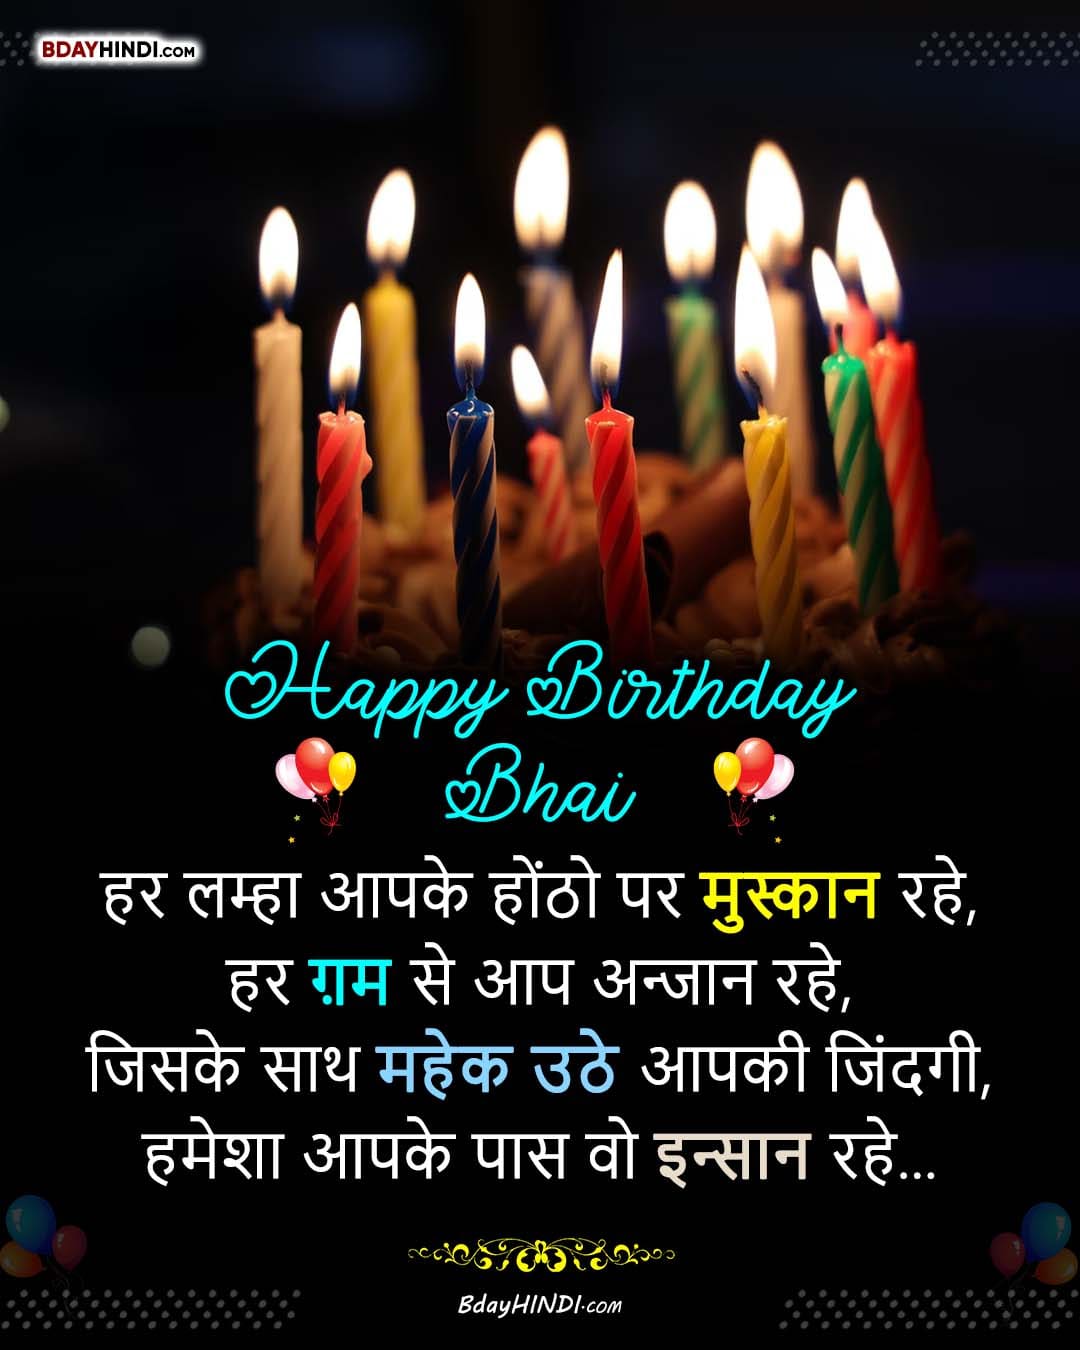 Best Birthday Wishes for Brother in Hindi